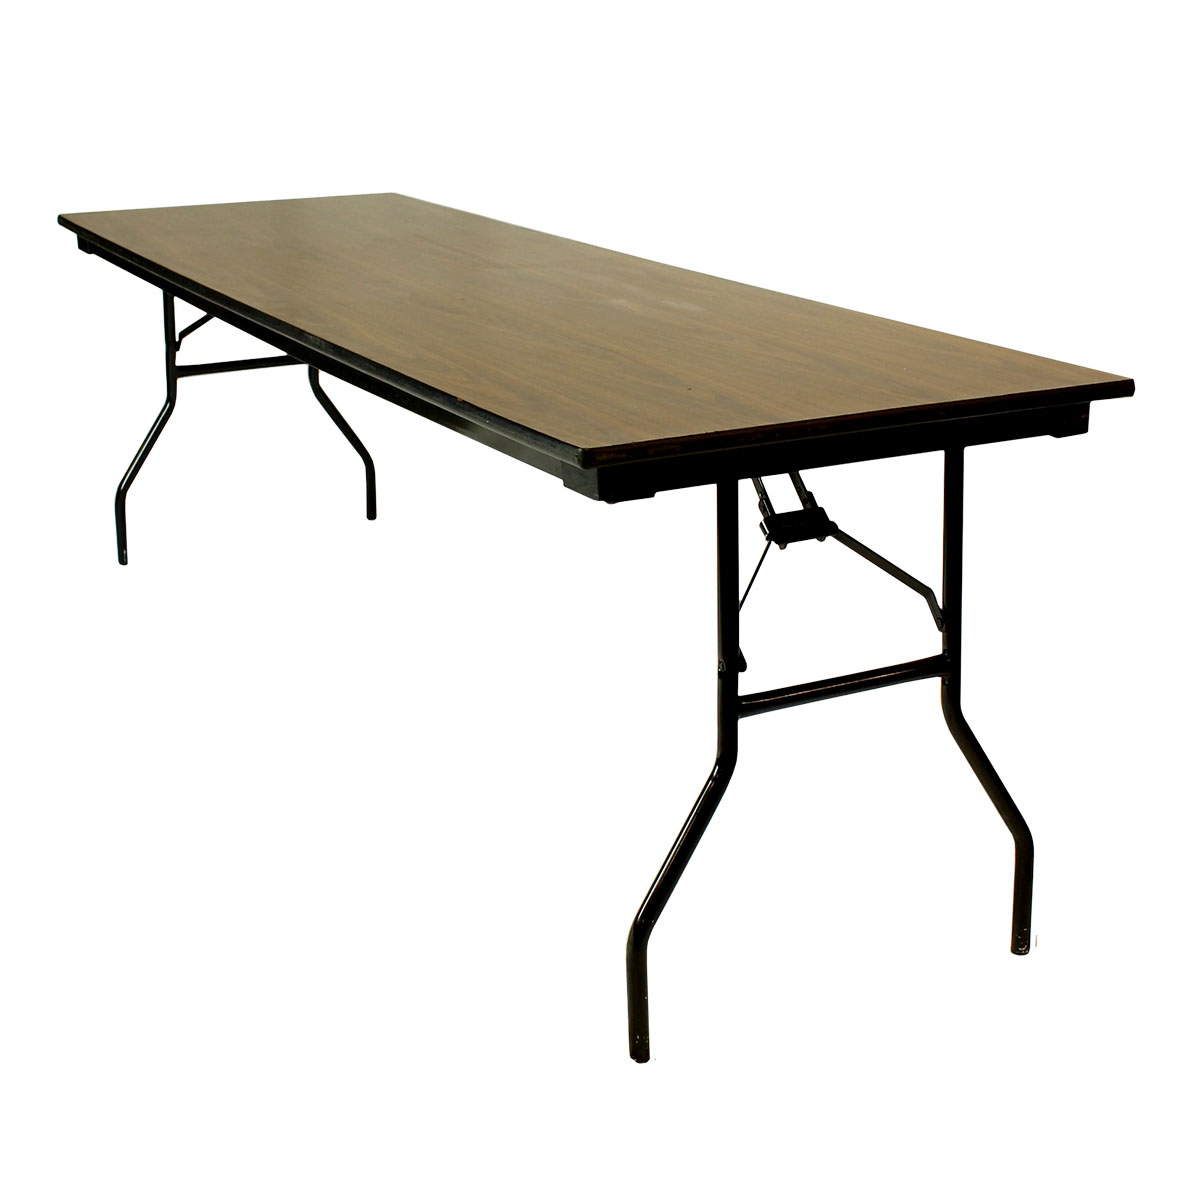 Table 8'x30" Formica Topped #4